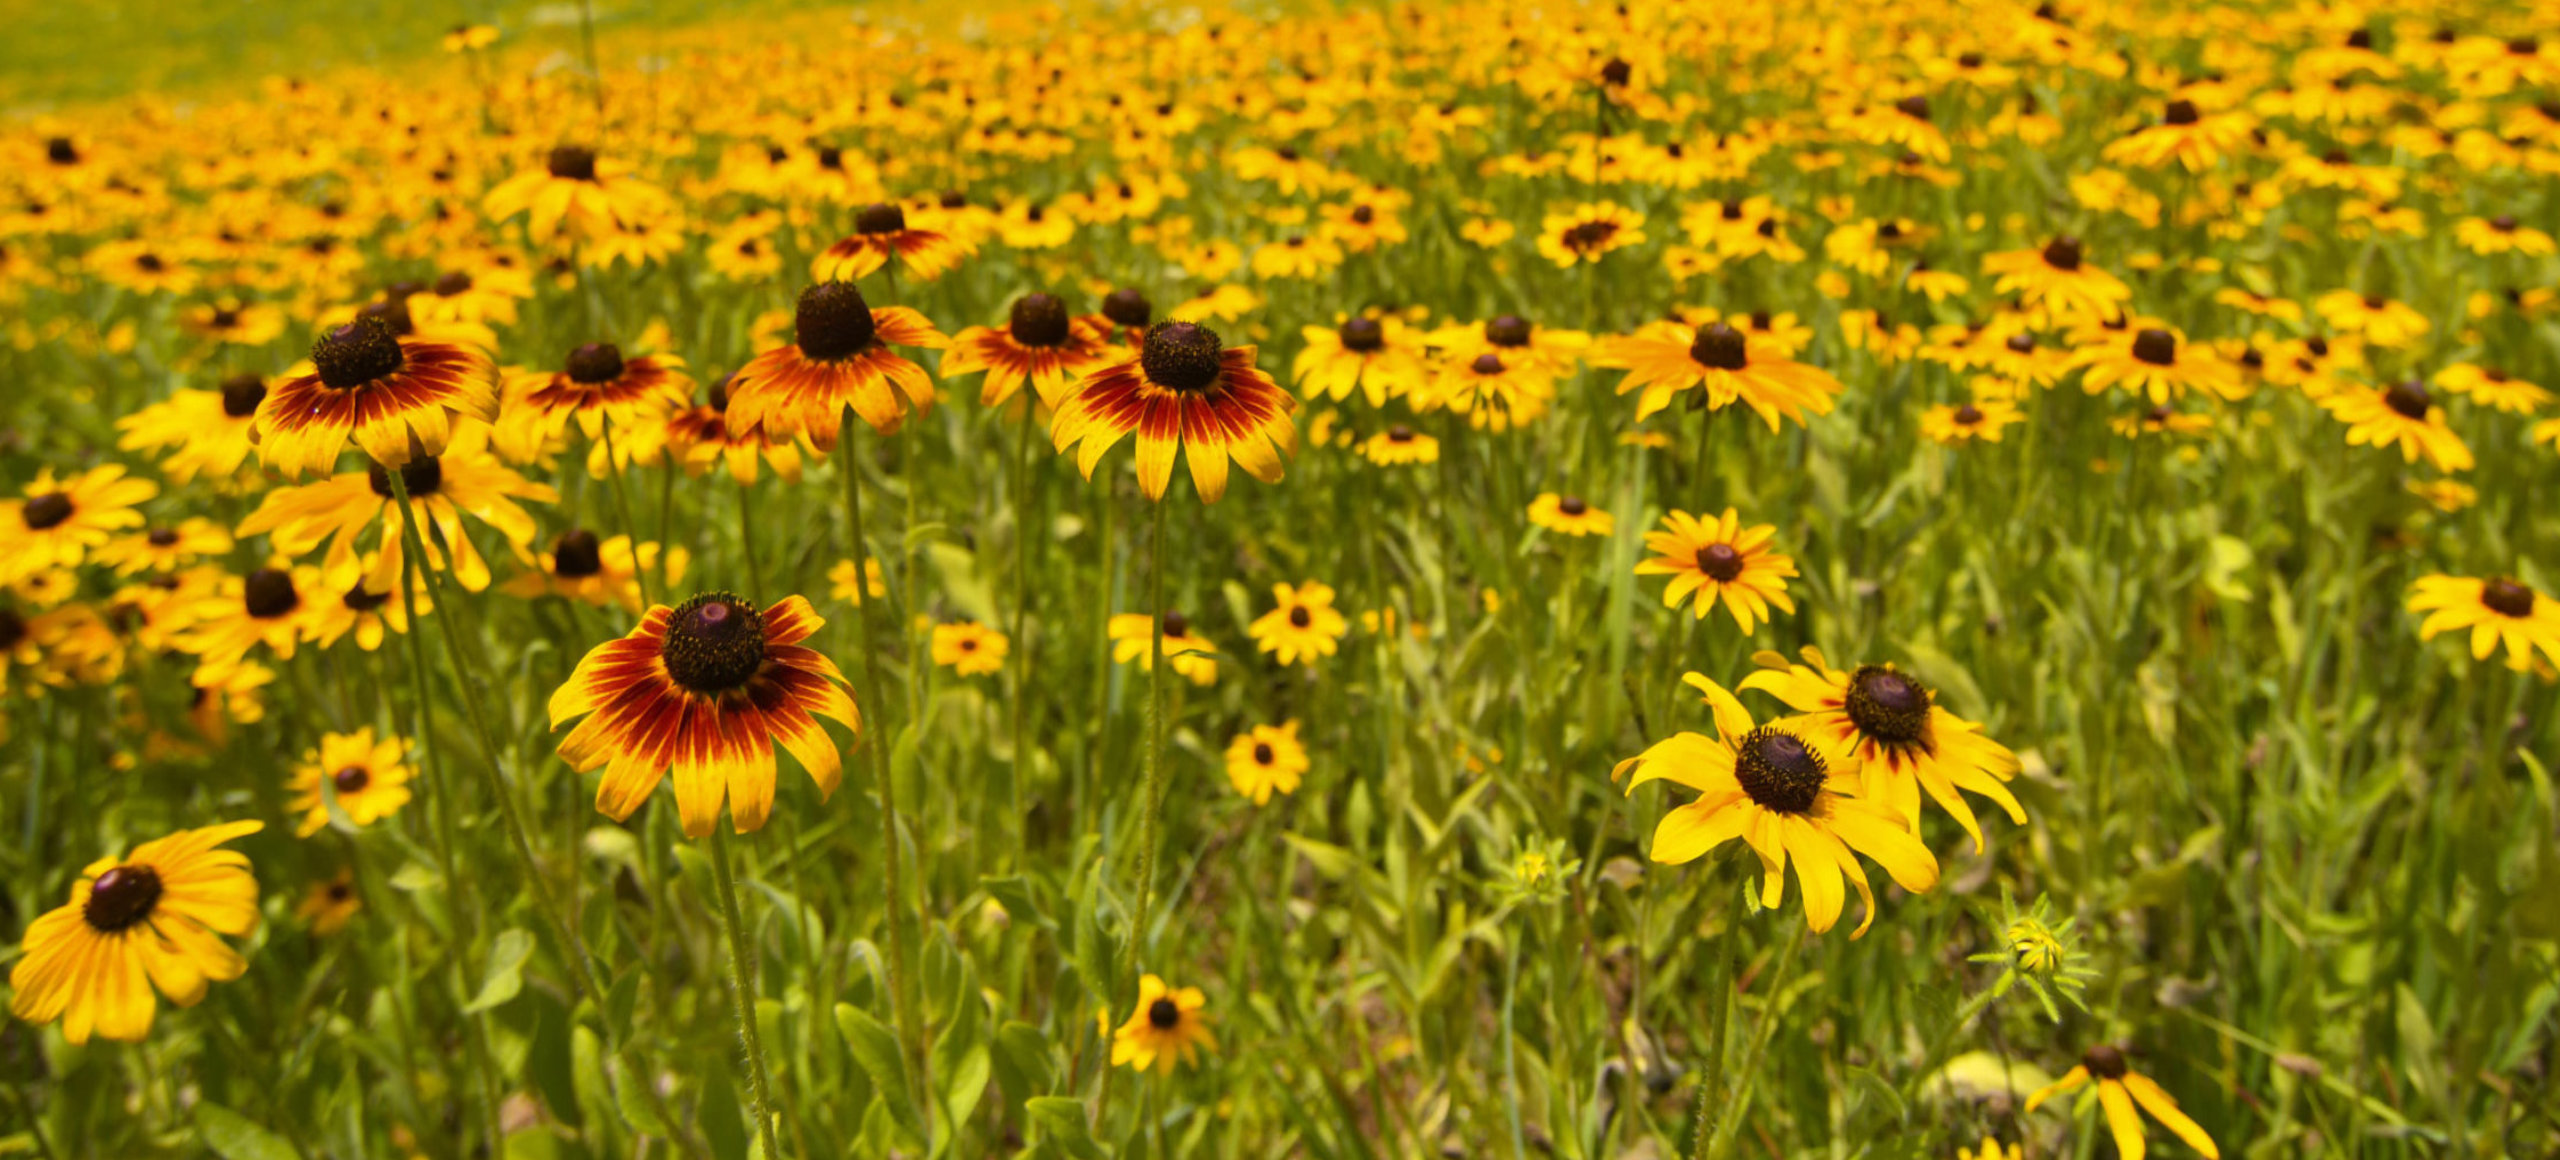 A field of yellow and orange wildflowers with brown centers.